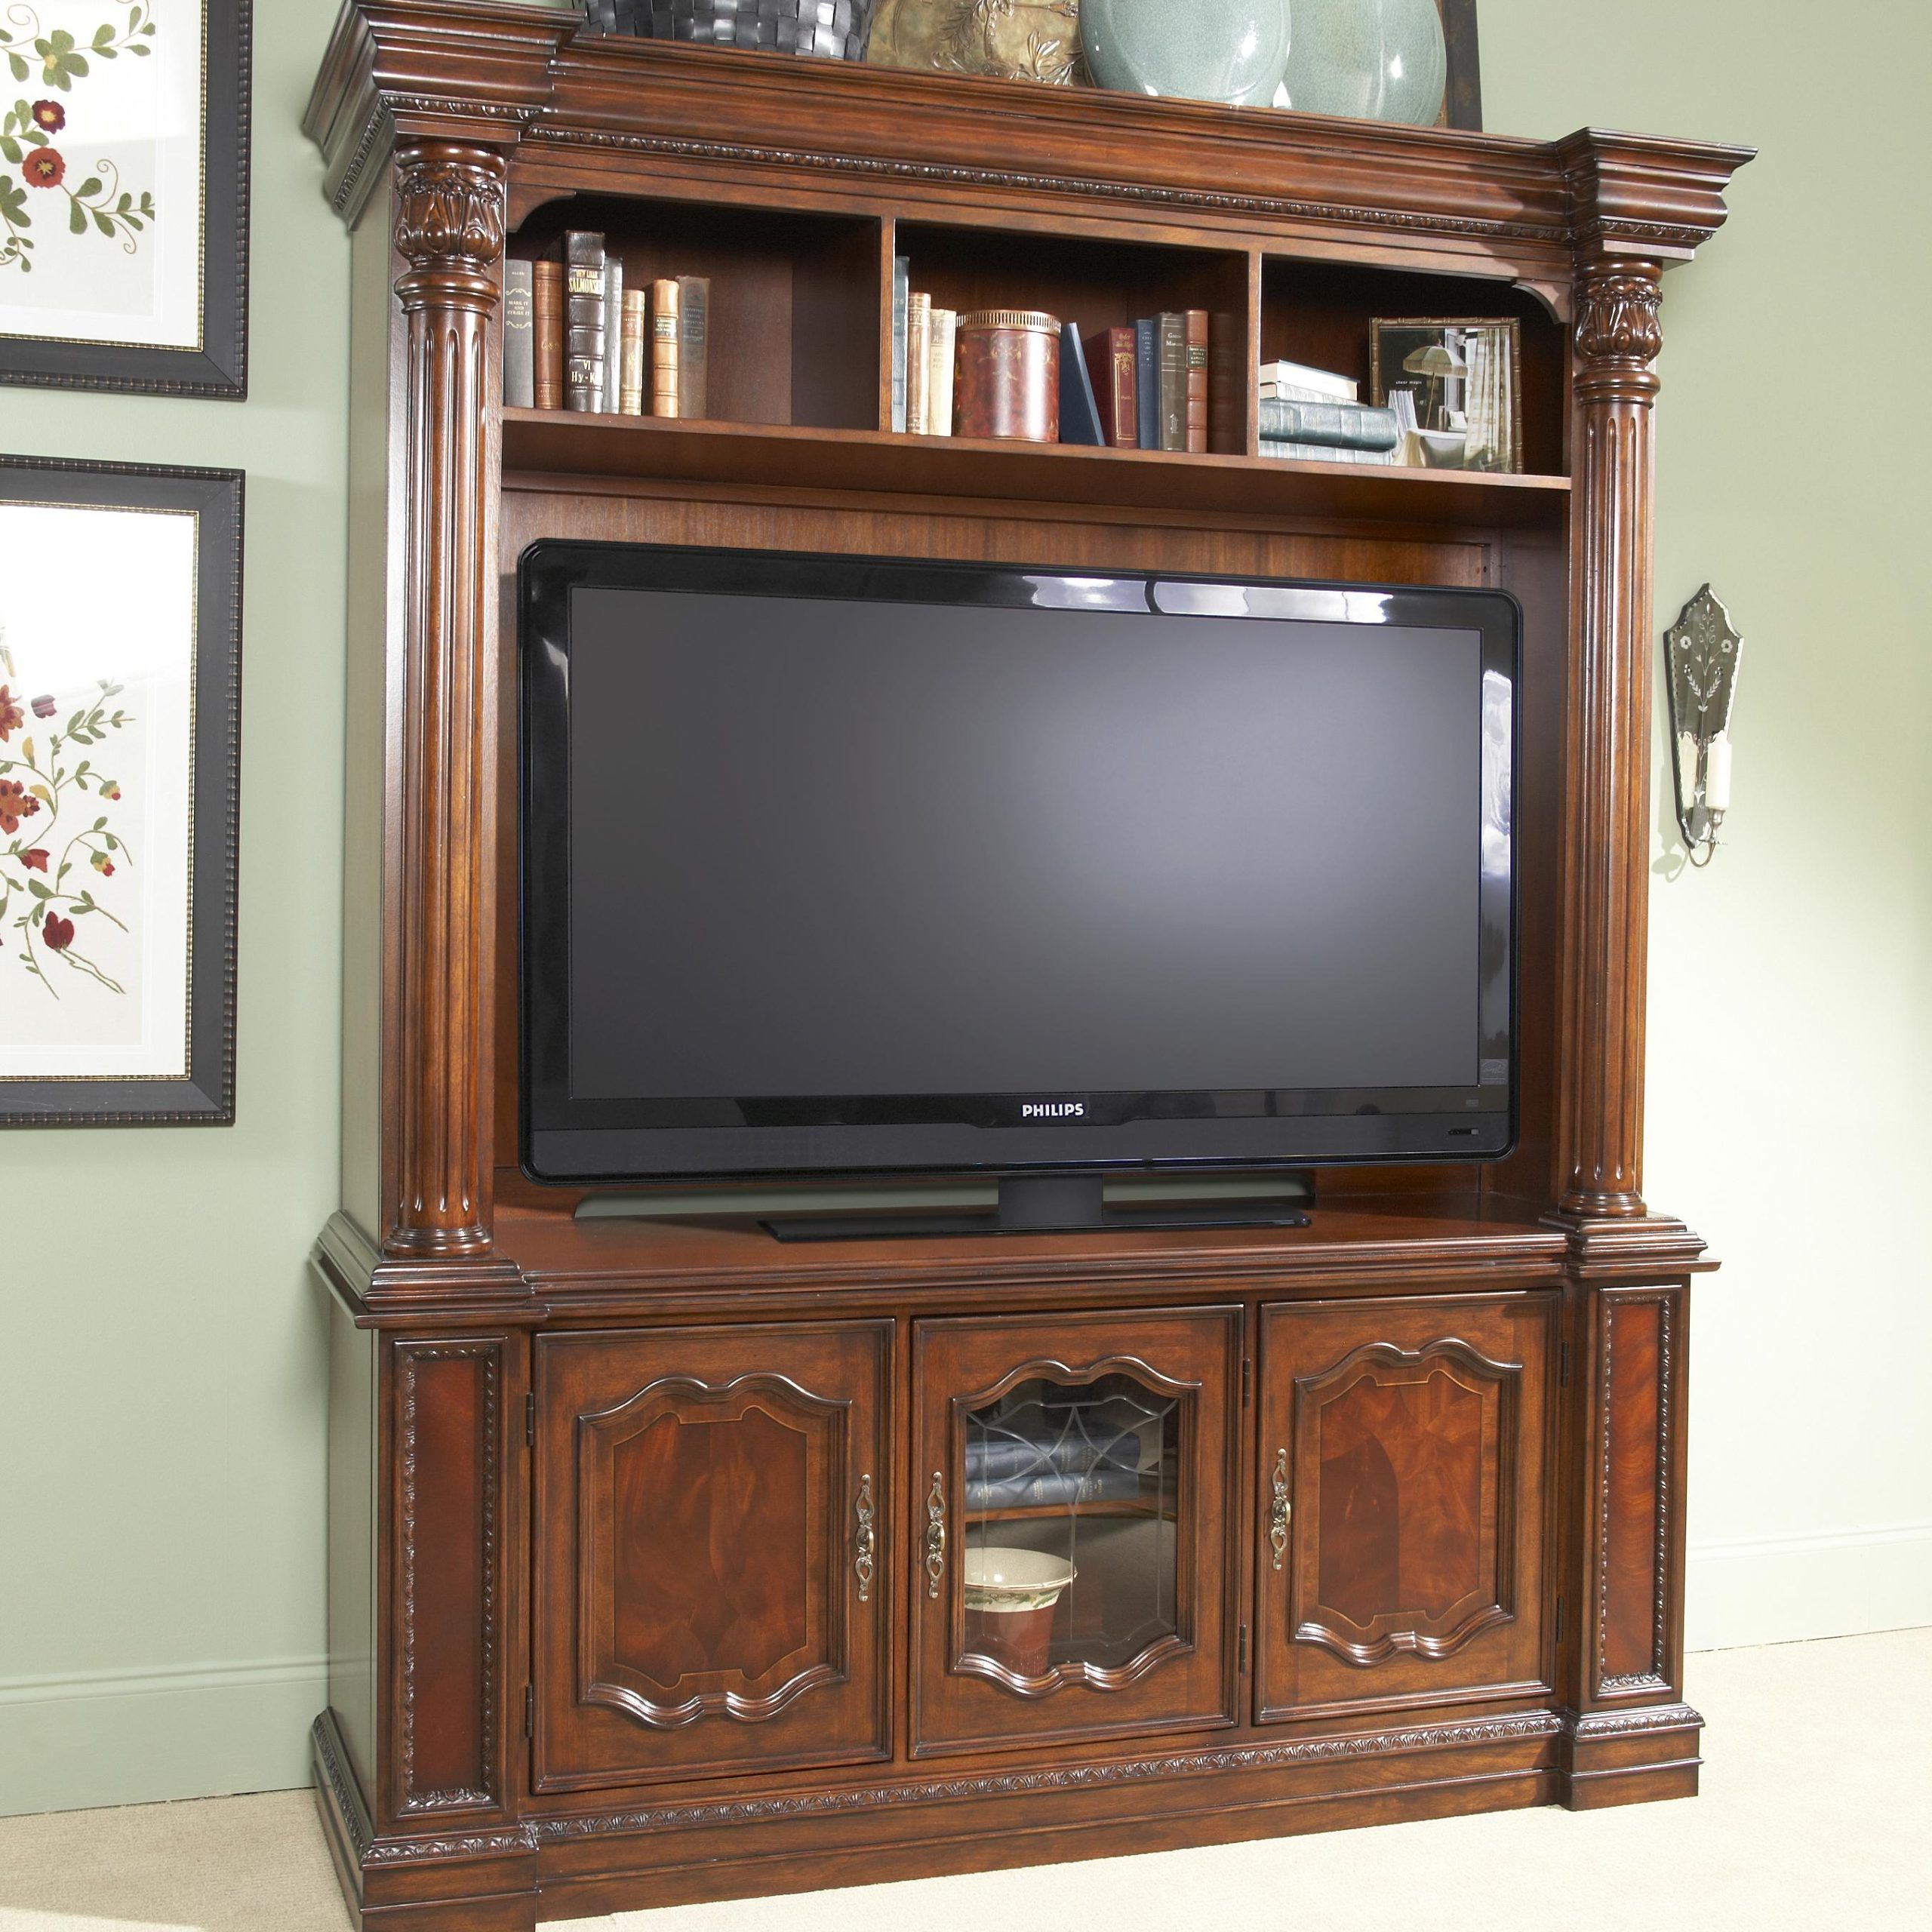 Entertainment Center Cabinet With Several Unique Storage Features Regarding Entertainment Center With Storage Cabinet (Gallery 2 of 20)